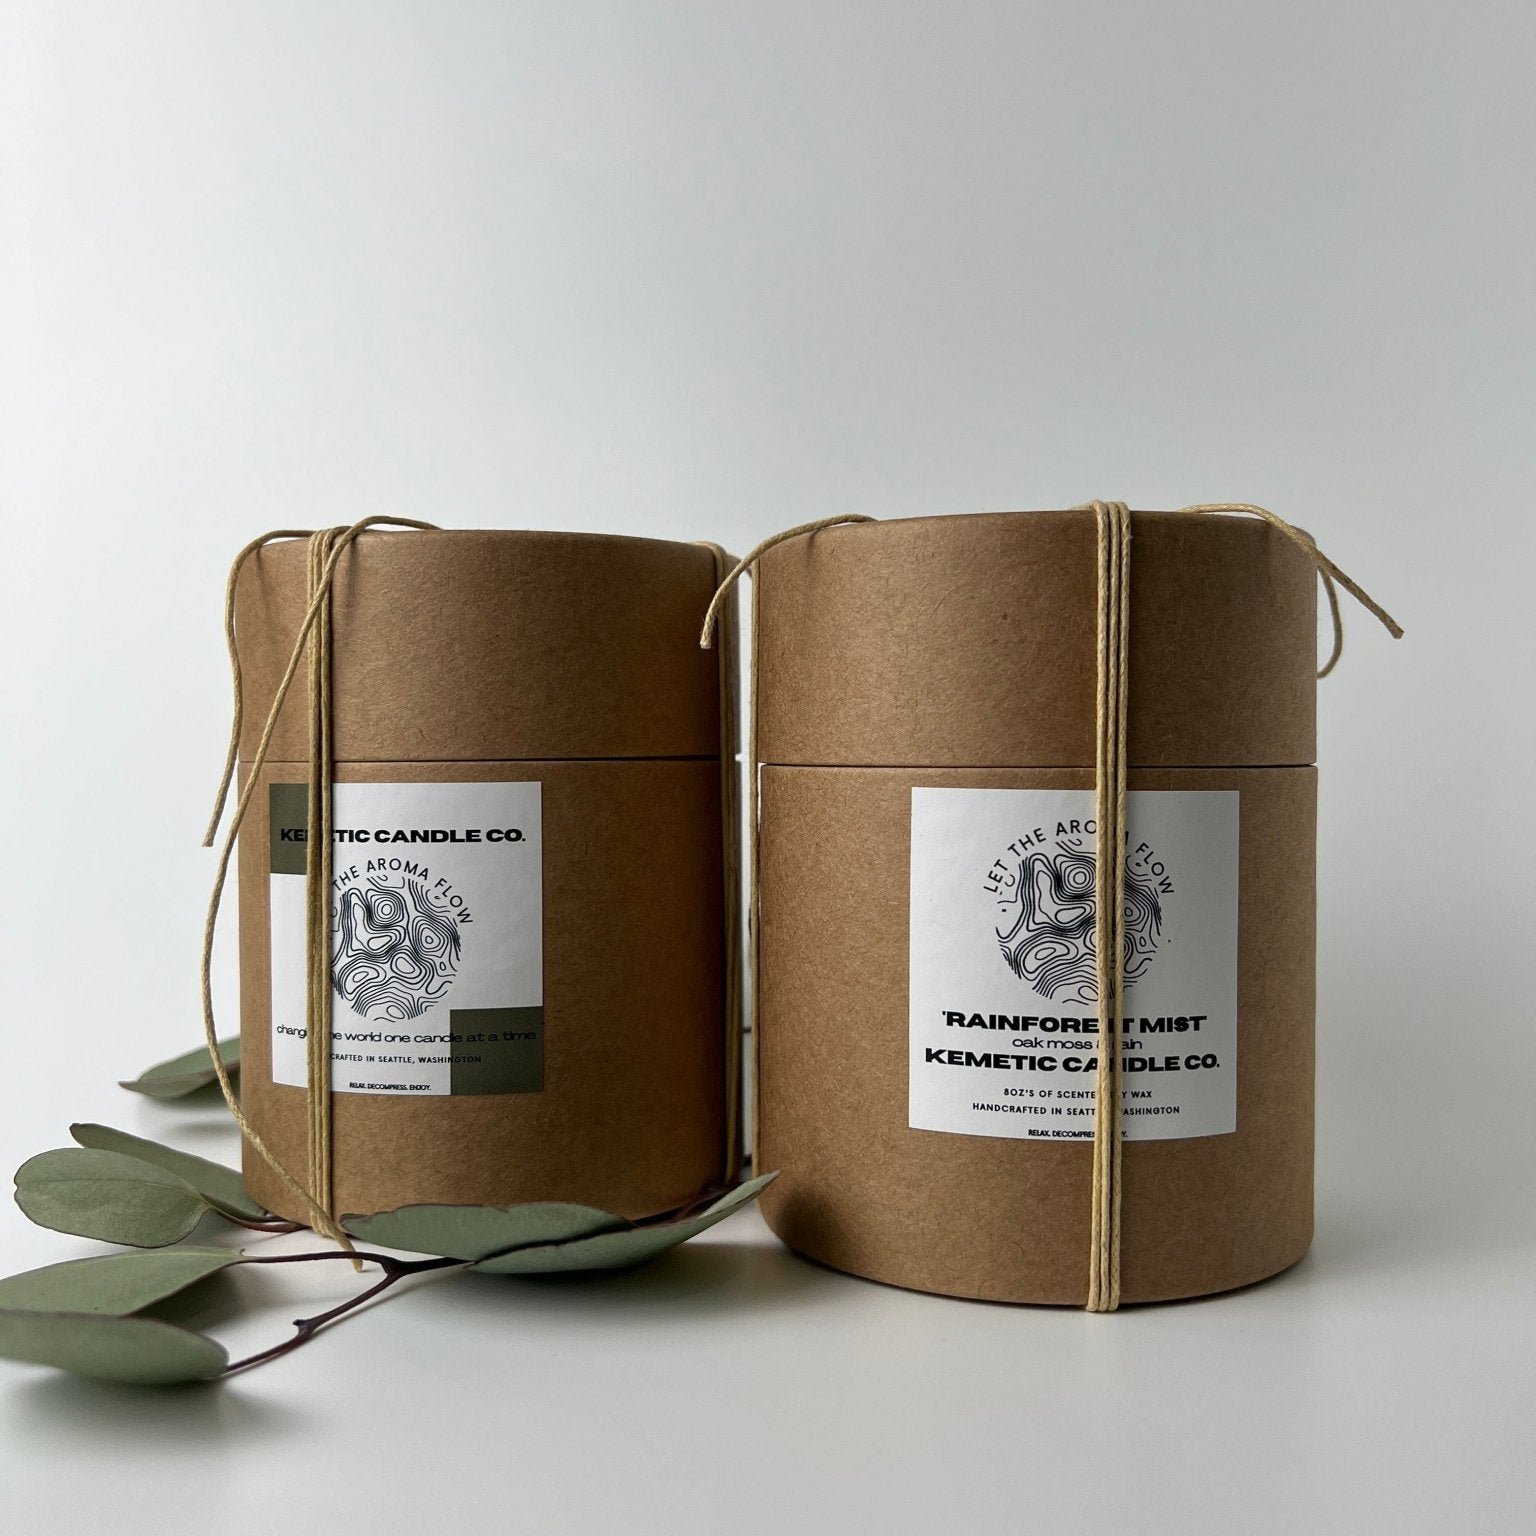 Bring the refreshing scent of the Pacific North West rainforest into your home with Kemetic Candle Co.'s Rainforest Mist 8 oz candles. Shop now and experience nature's tranquility.